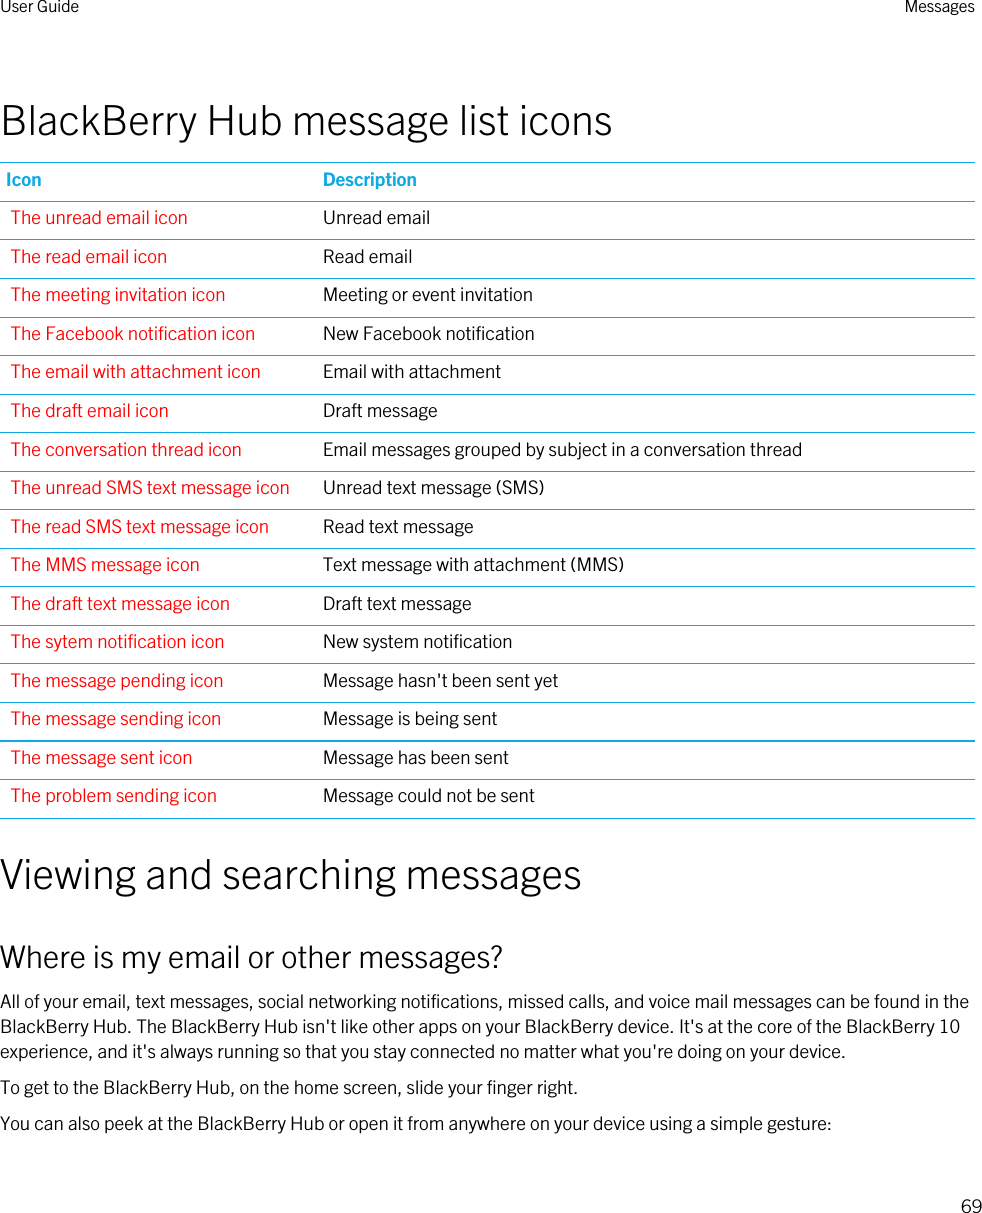 BlackBerry Hub message list iconsIcon DescriptionThe unread email icon Unread emailThe read email icon Read emailThe meeting invitation icon Meeting or event invitationThe Facebook notification icon New Facebook notificationThe email with attachment icon Email with attachmentThe draft email icon Draft messageThe conversation thread icon Email messages grouped by subject in a conversation threadThe unread SMS text message icon Unread text message (SMS)The read SMS text message icon Read text messageThe MMS message icon Text message with attachment (MMS)The draft text message icon Draft text messageThe sytem notification icon New system notificationThe message pending icon Message hasn&apos;t been sent yetThe message sending icon Message is being sentThe message sent icon Message has been sentThe problem sending icon Message could not be sentViewing and searching messagesWhere is my email or other messages?All of your email, text messages, social networking notifications, missed calls, and voice mail messages can be found in the BlackBerry Hub. The BlackBerry Hub isn&apos;t like other apps on your BlackBerry device. It&apos;s at the core of the BlackBerry 10 experience, and it&apos;s always running so that you stay connected no matter what you&apos;re doing on your device.To get to the BlackBerry Hub, on the home screen, slide your finger right.You can also peek at the BlackBerry Hub or open it from anywhere on your device using a simple gesture: User Guide Messages69